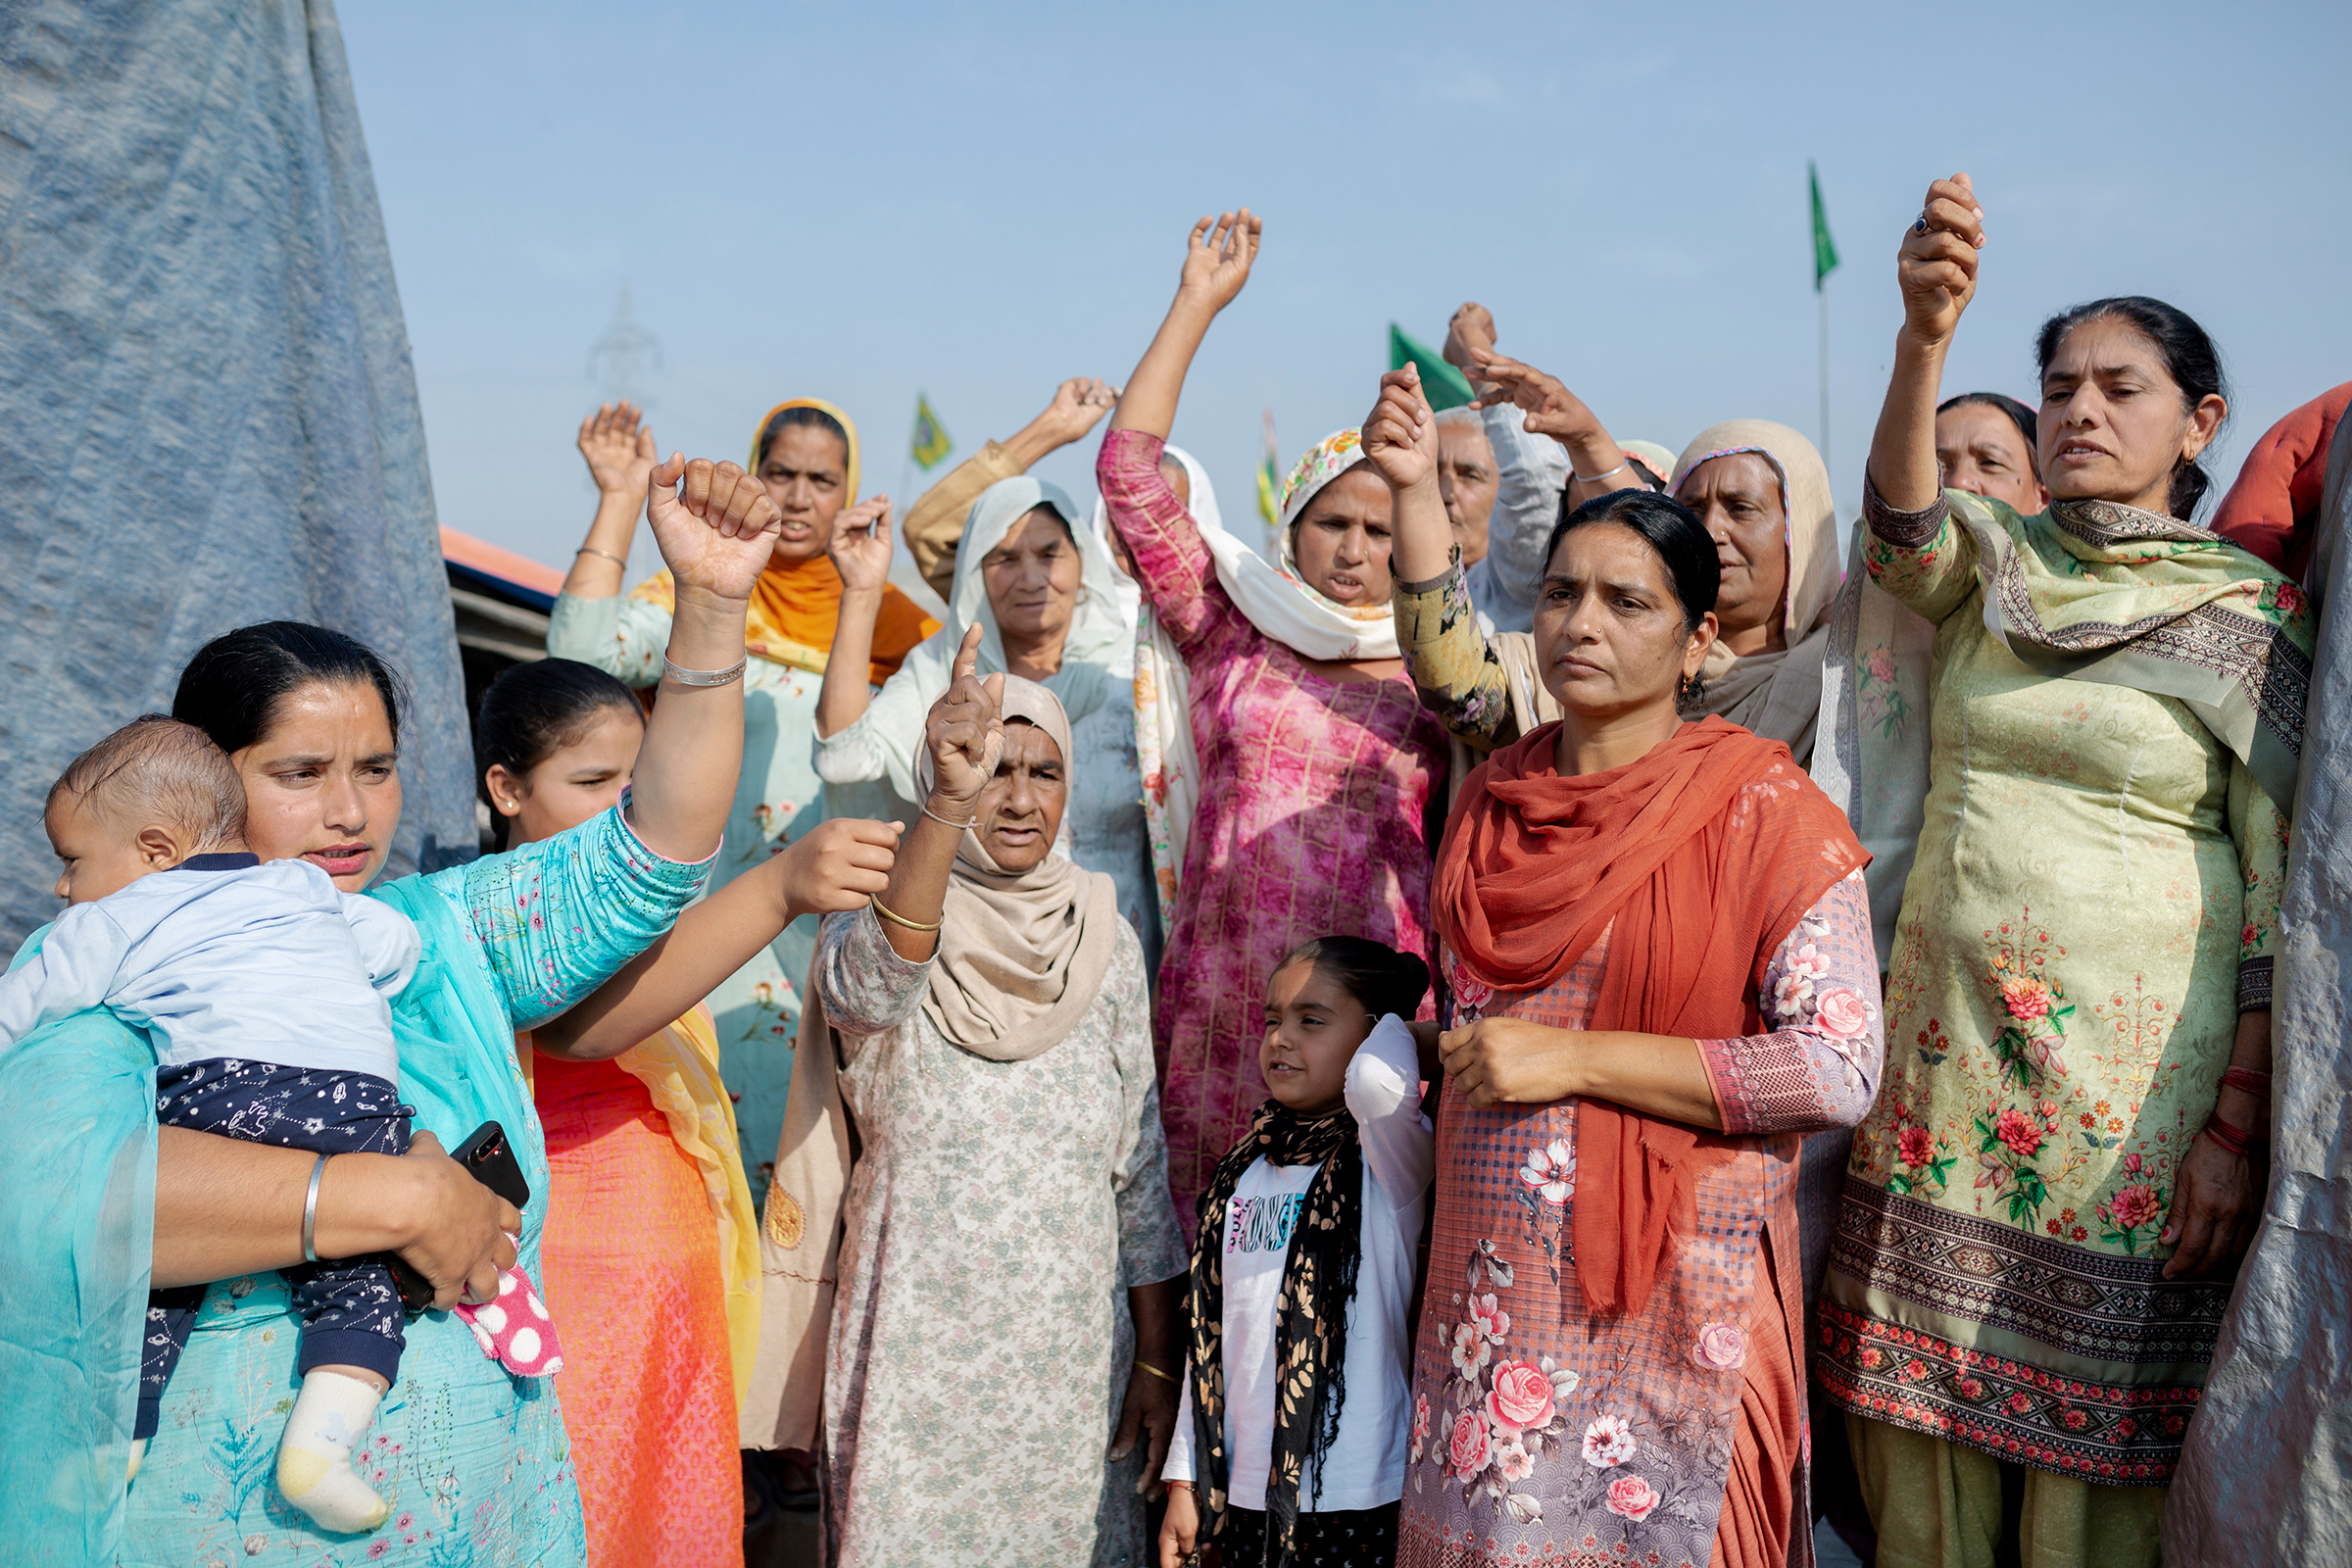 In November, a year after massive protests began over agricultural laws, Indian Prime Minister Narendra Modi pledged they would be repealed. Kiranjit Kaur, far left, came to the Tikri protest site from Talwandi, Punjab, on Feb. 23 with a group of 20 women, including her mother-in-law and children. “It is important for all women to come here and mark their presence in this movement. I have two daughters, and I want them to grow up into the strong women they see here.”